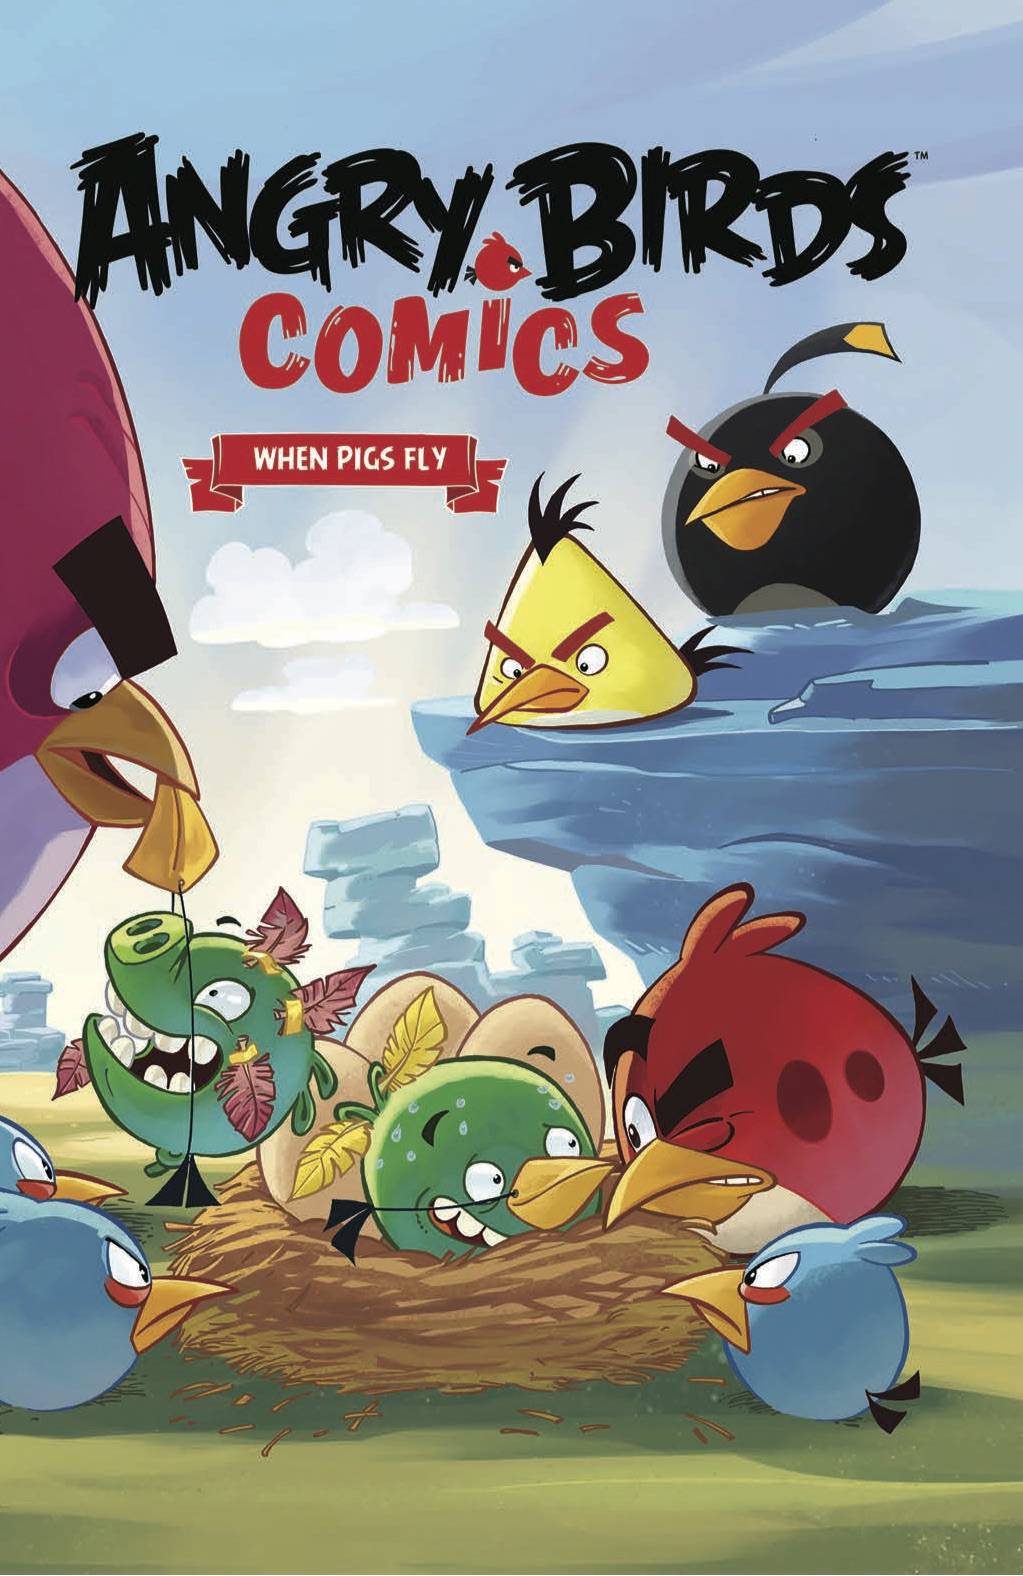 Angry Birds Comics Hardcover Volume 2 When Pigs Fly